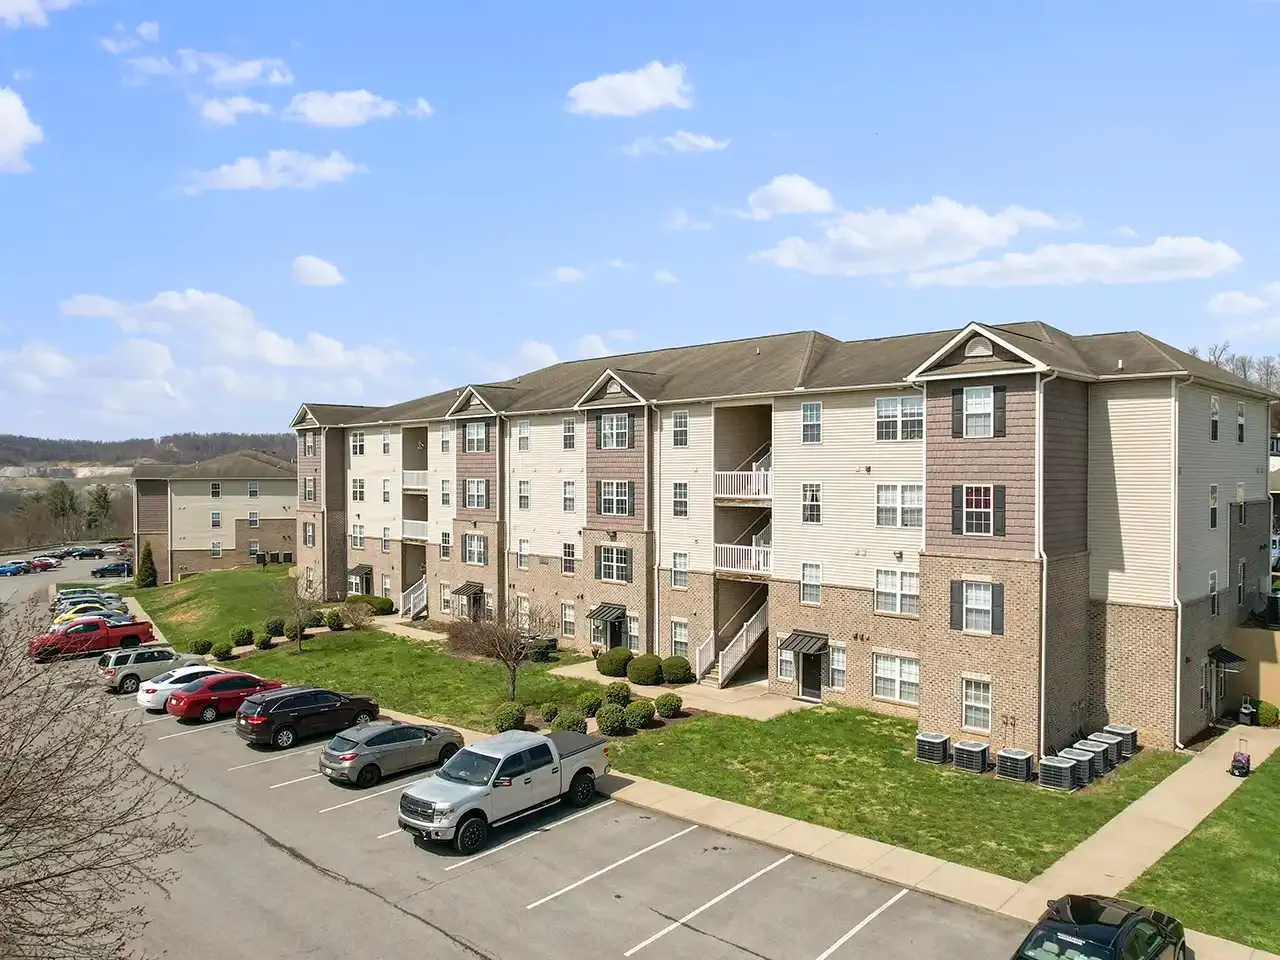 West Virginia Housing Mountain Valley Apt for West Virginia Students in , WV